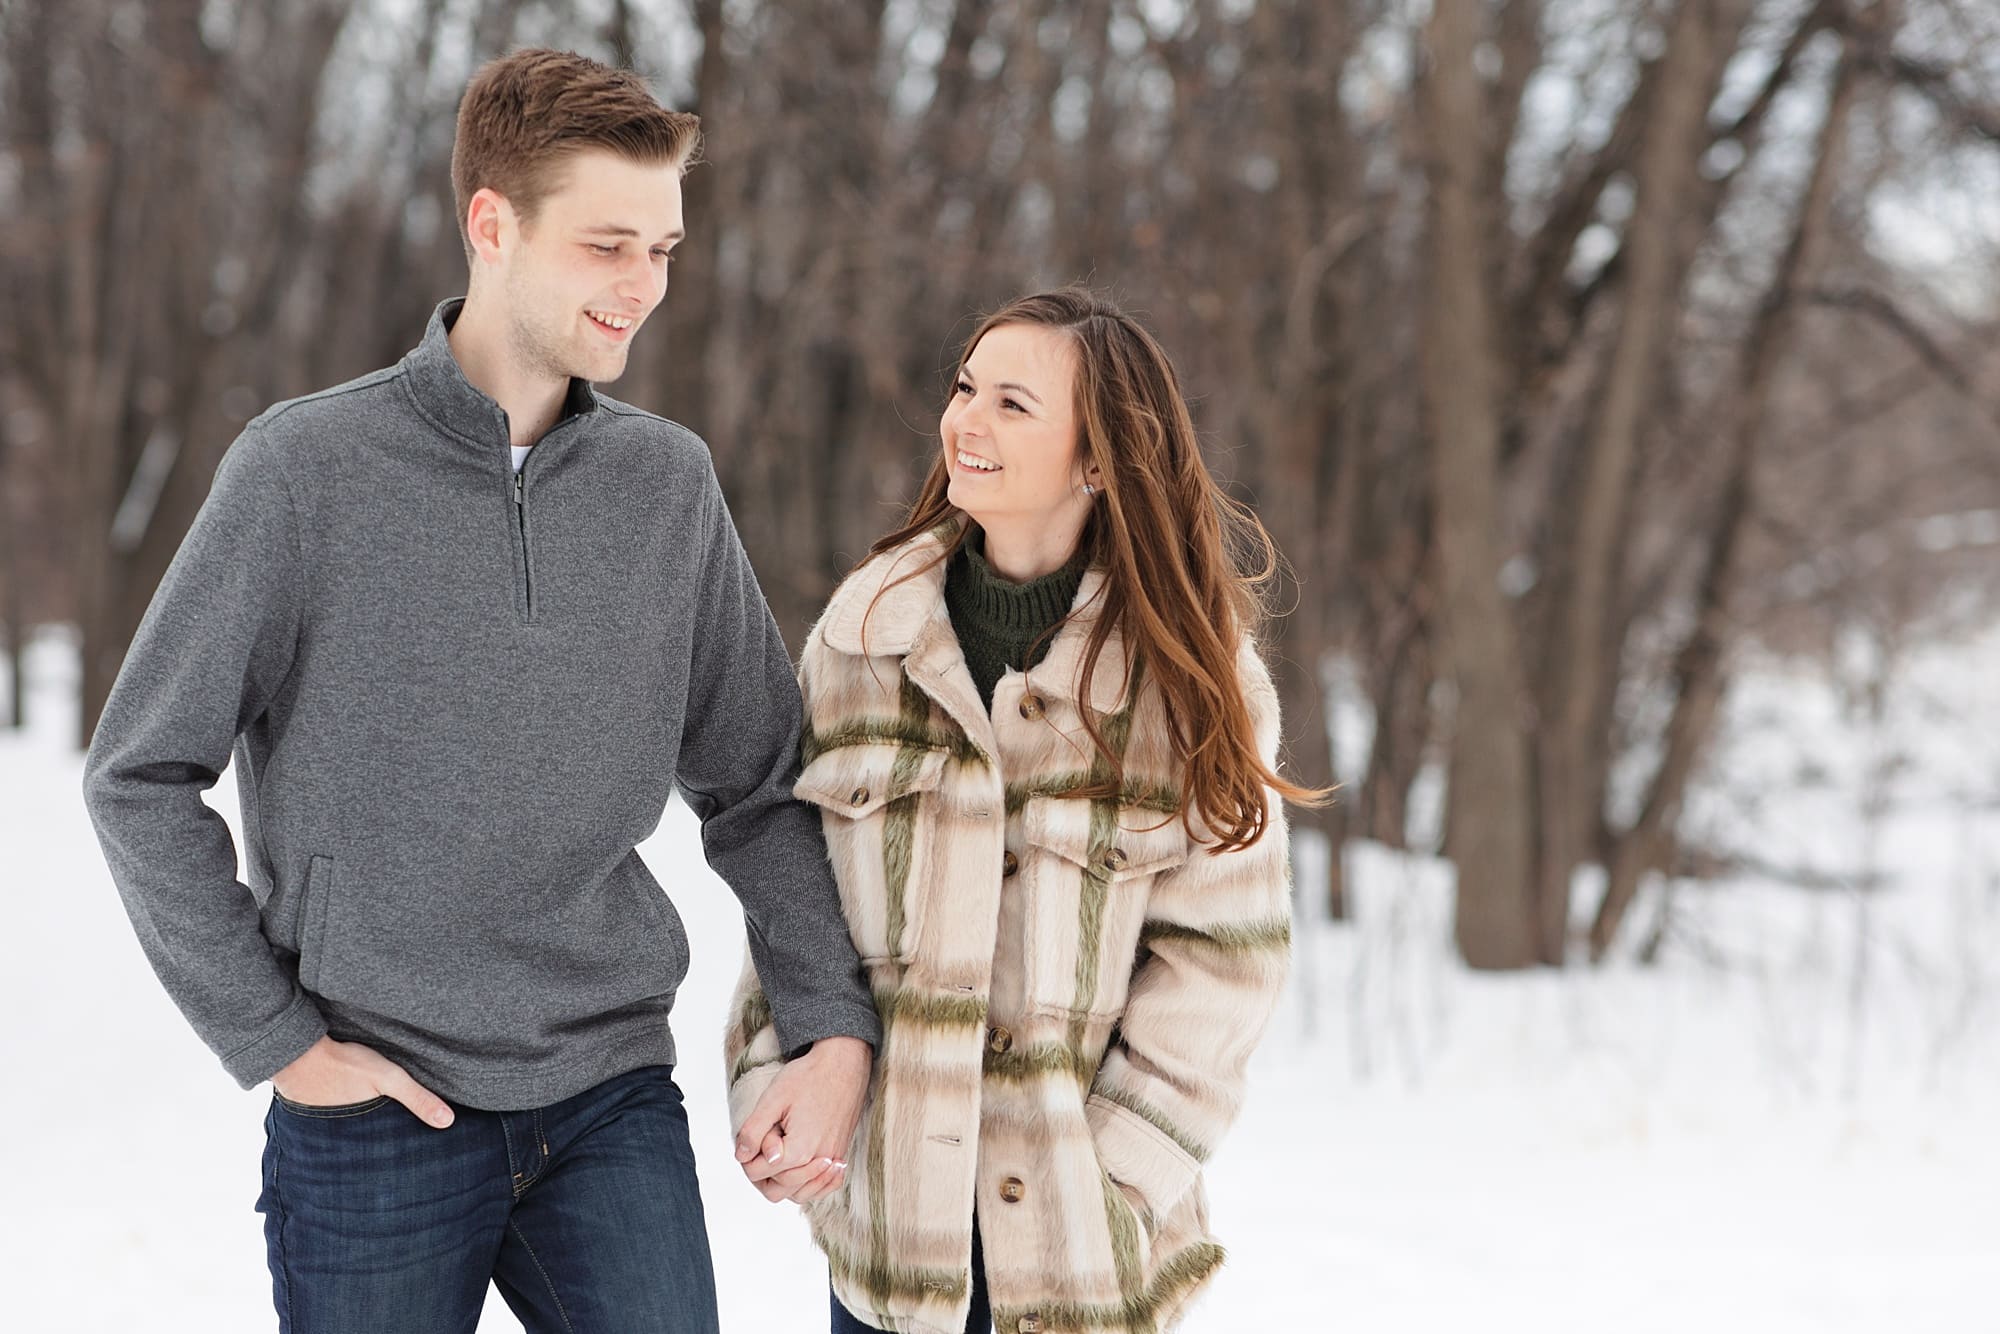 Engaged couple in grey sweater and tan jacket walk through the snow